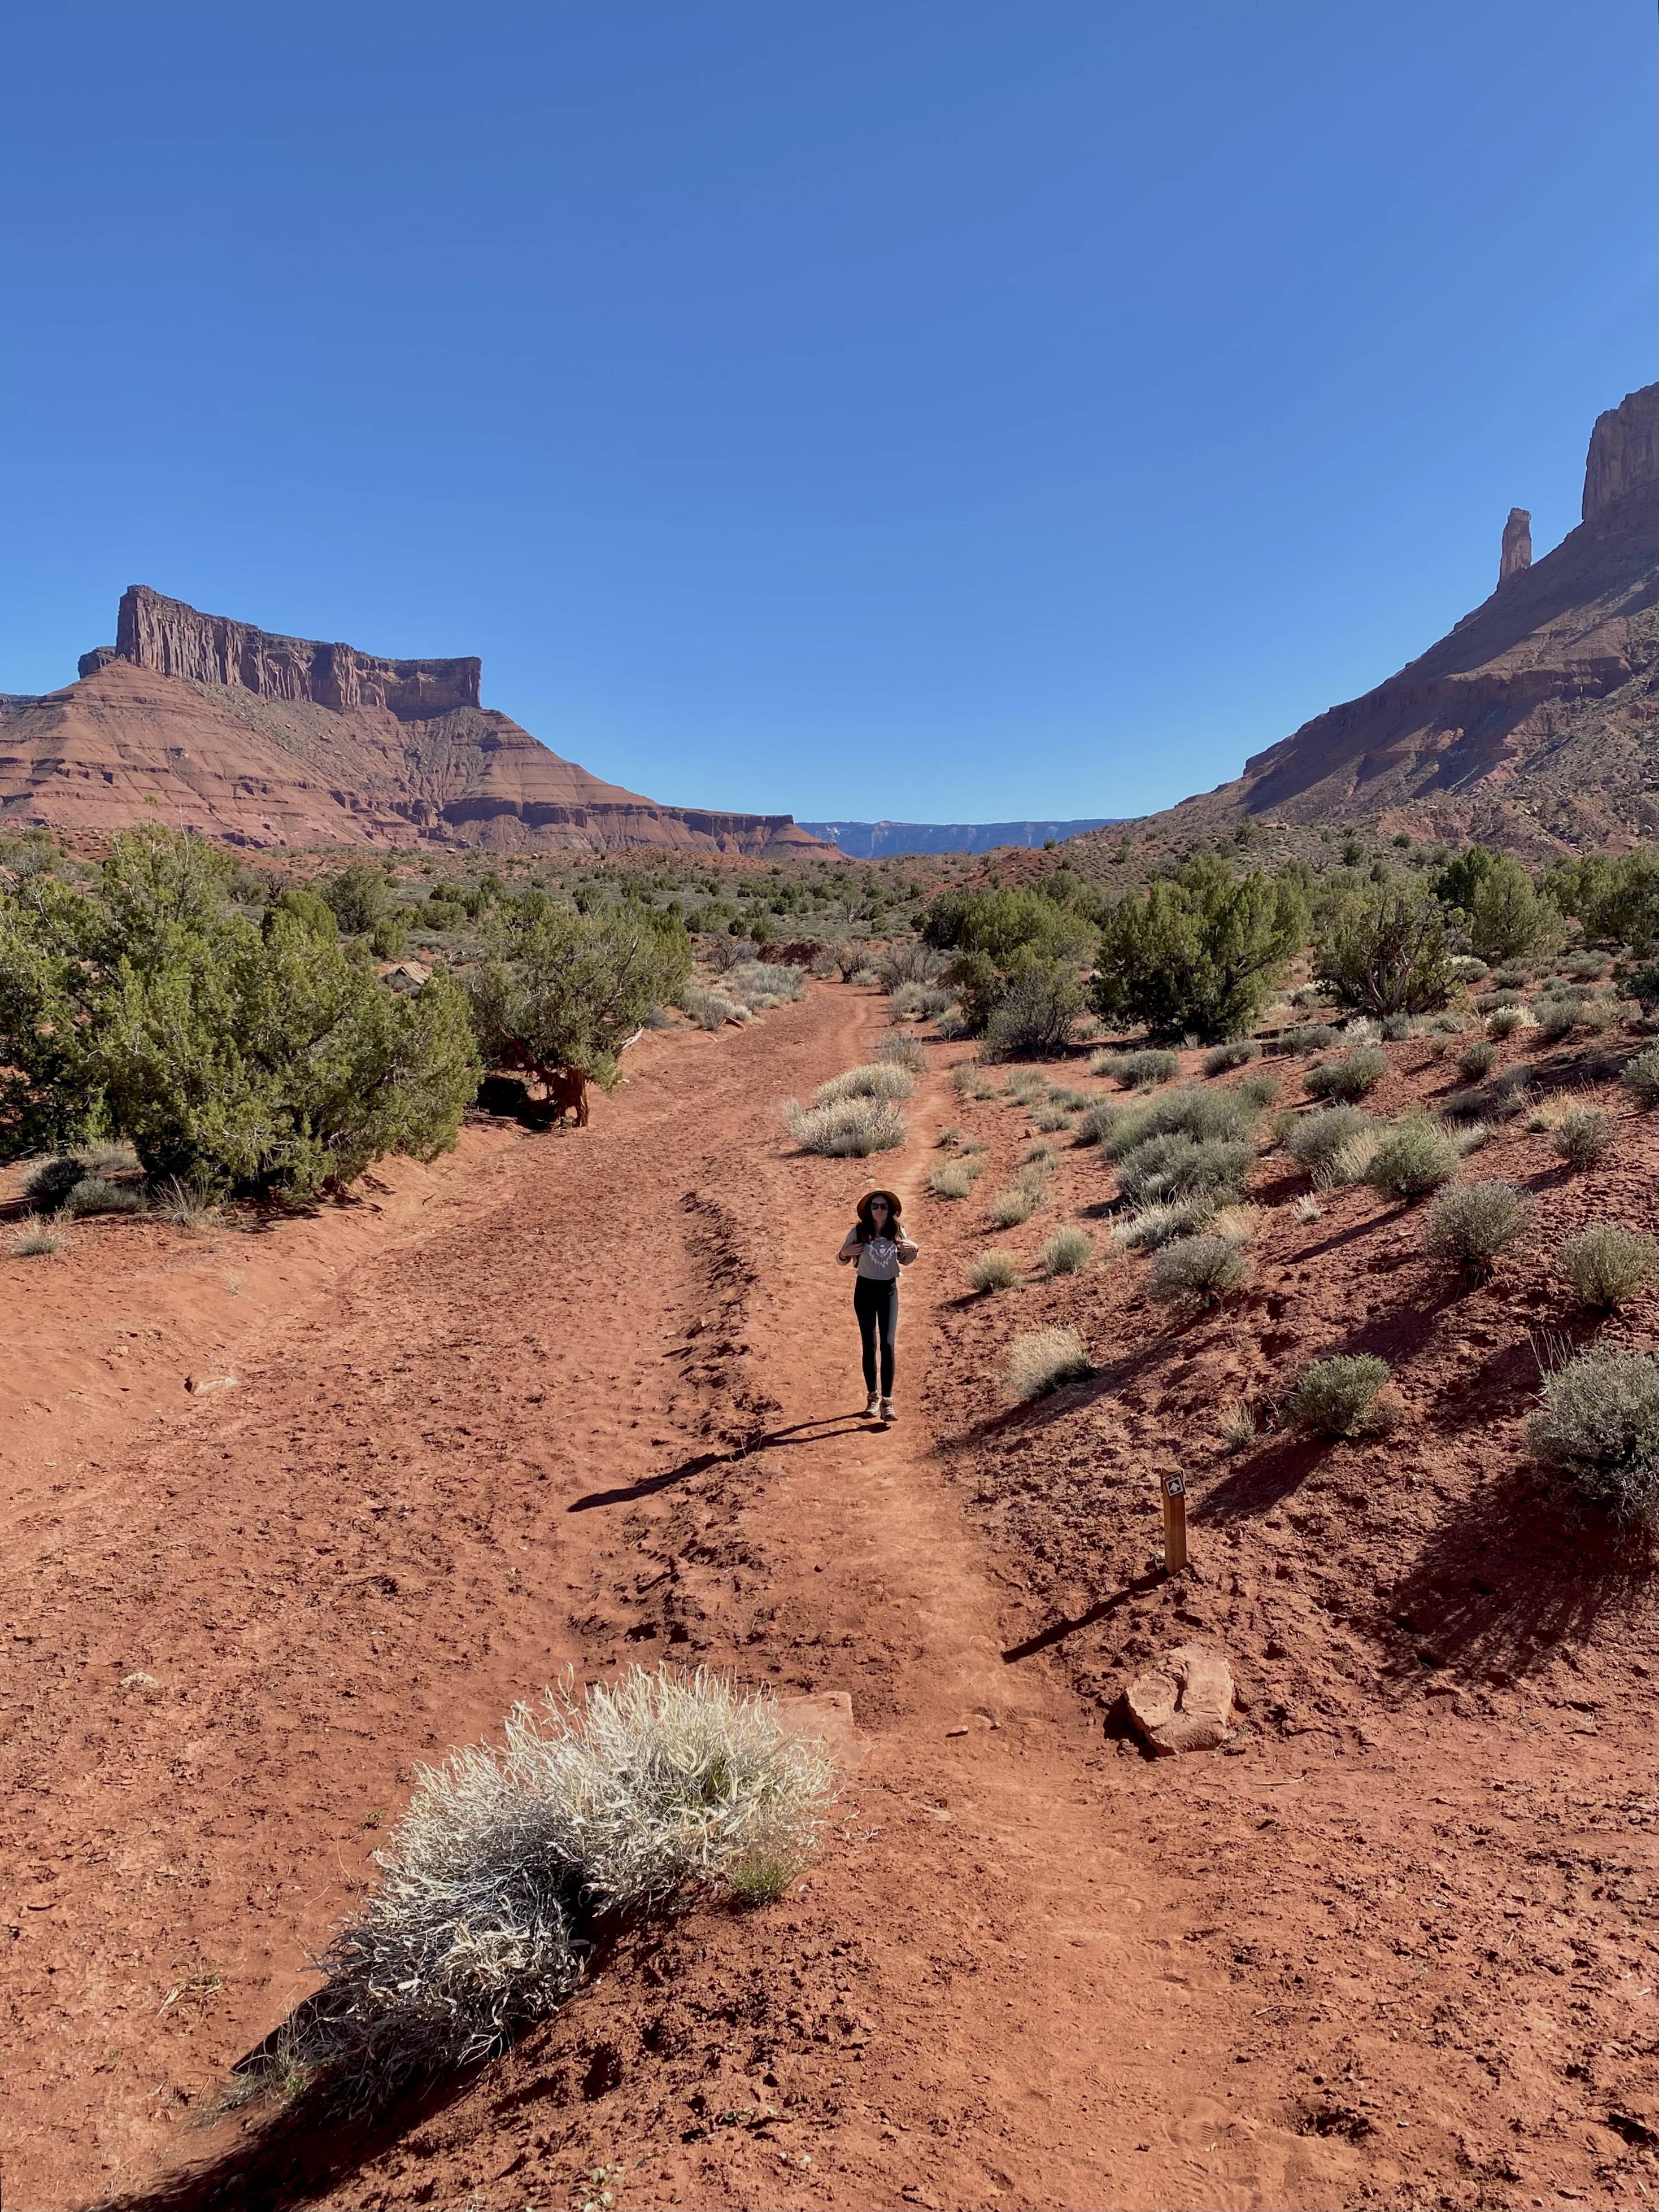 Caroline, in a hat, green sweatshirt and black pants, walks along a red dirt trail. Blue sky and green juniper bush in the background. 